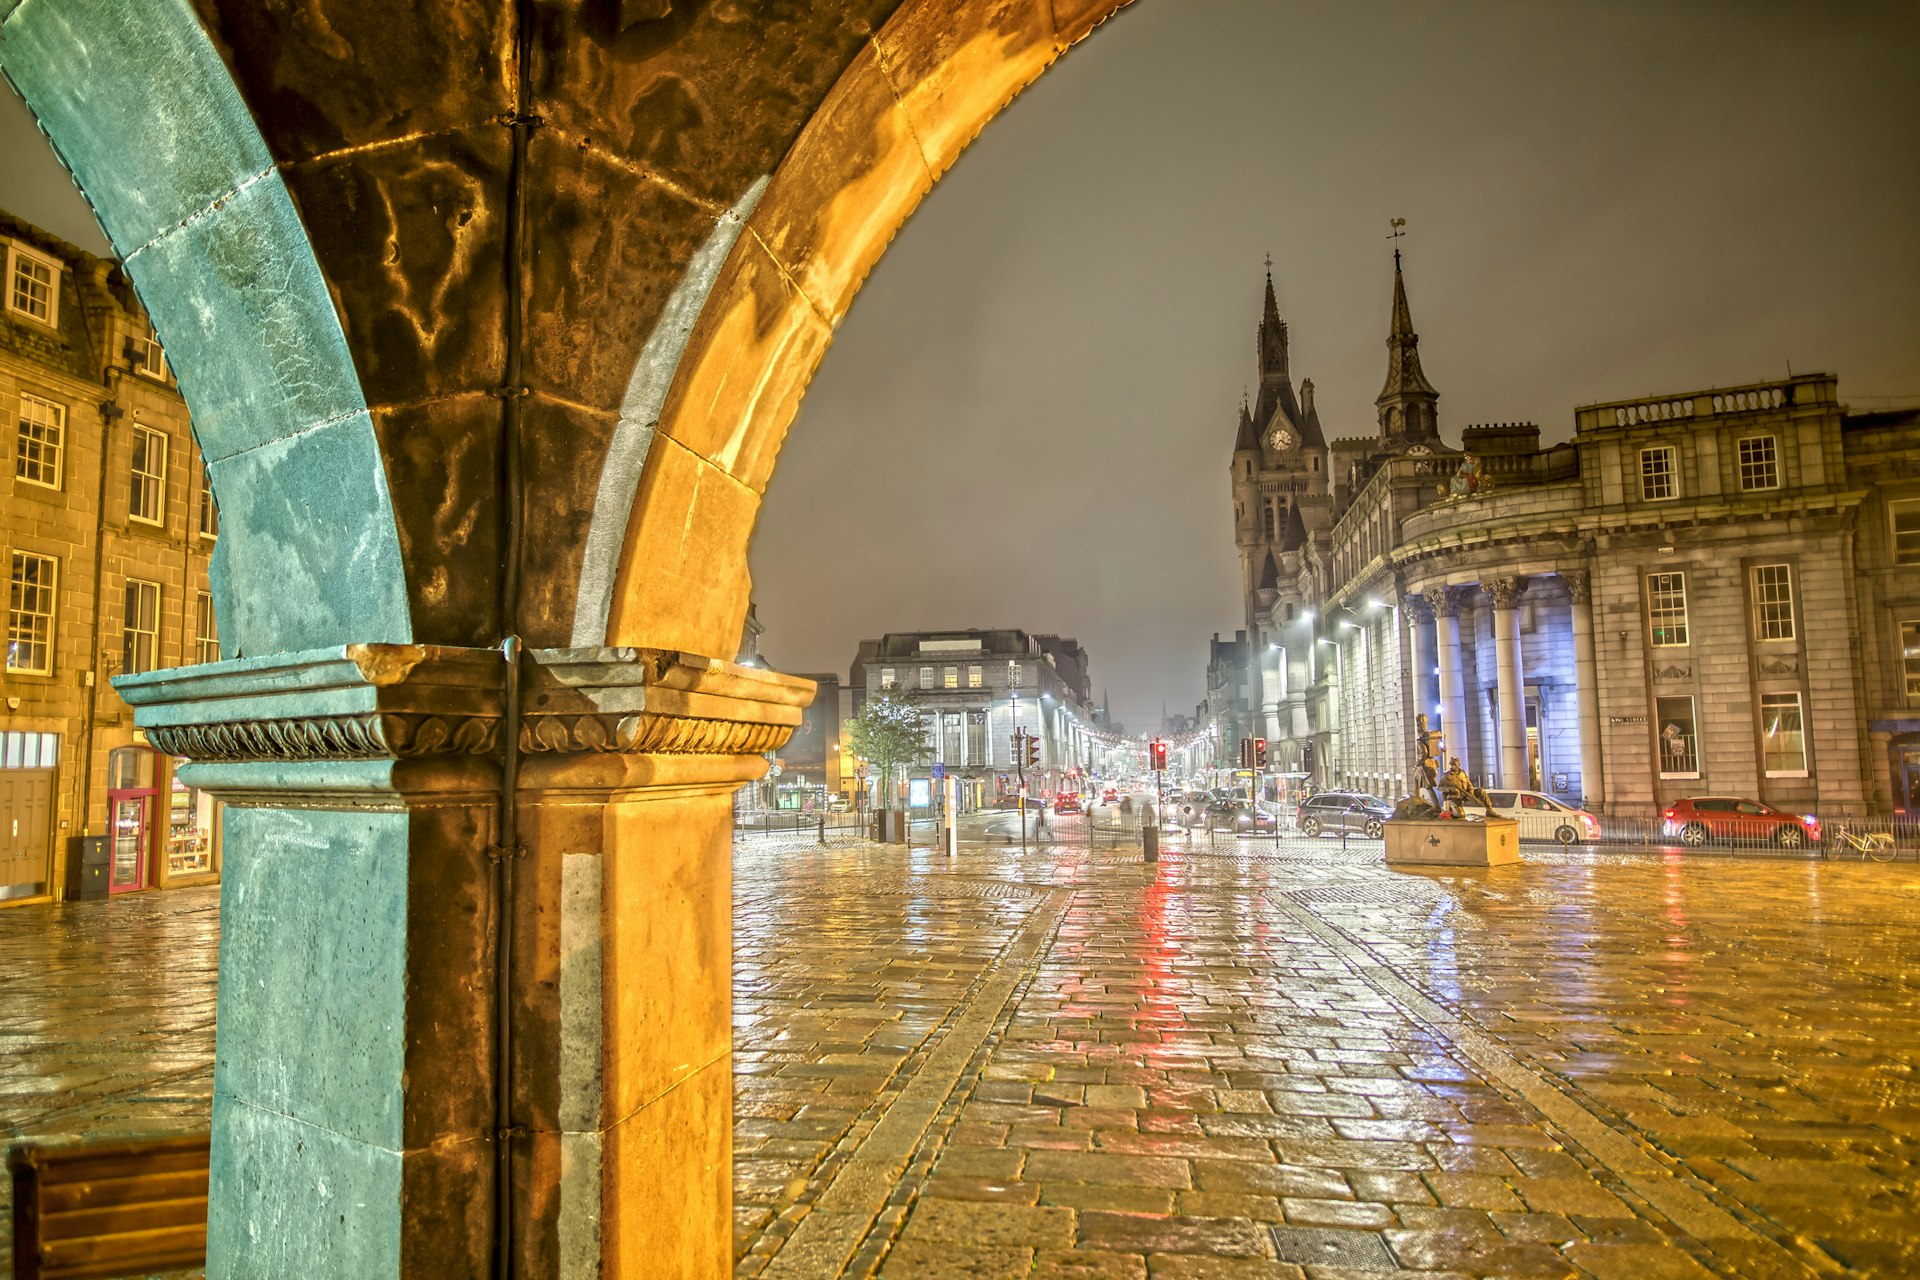 The rain-soaked cobbled streets of Aberdeen at night illuminated by street lights